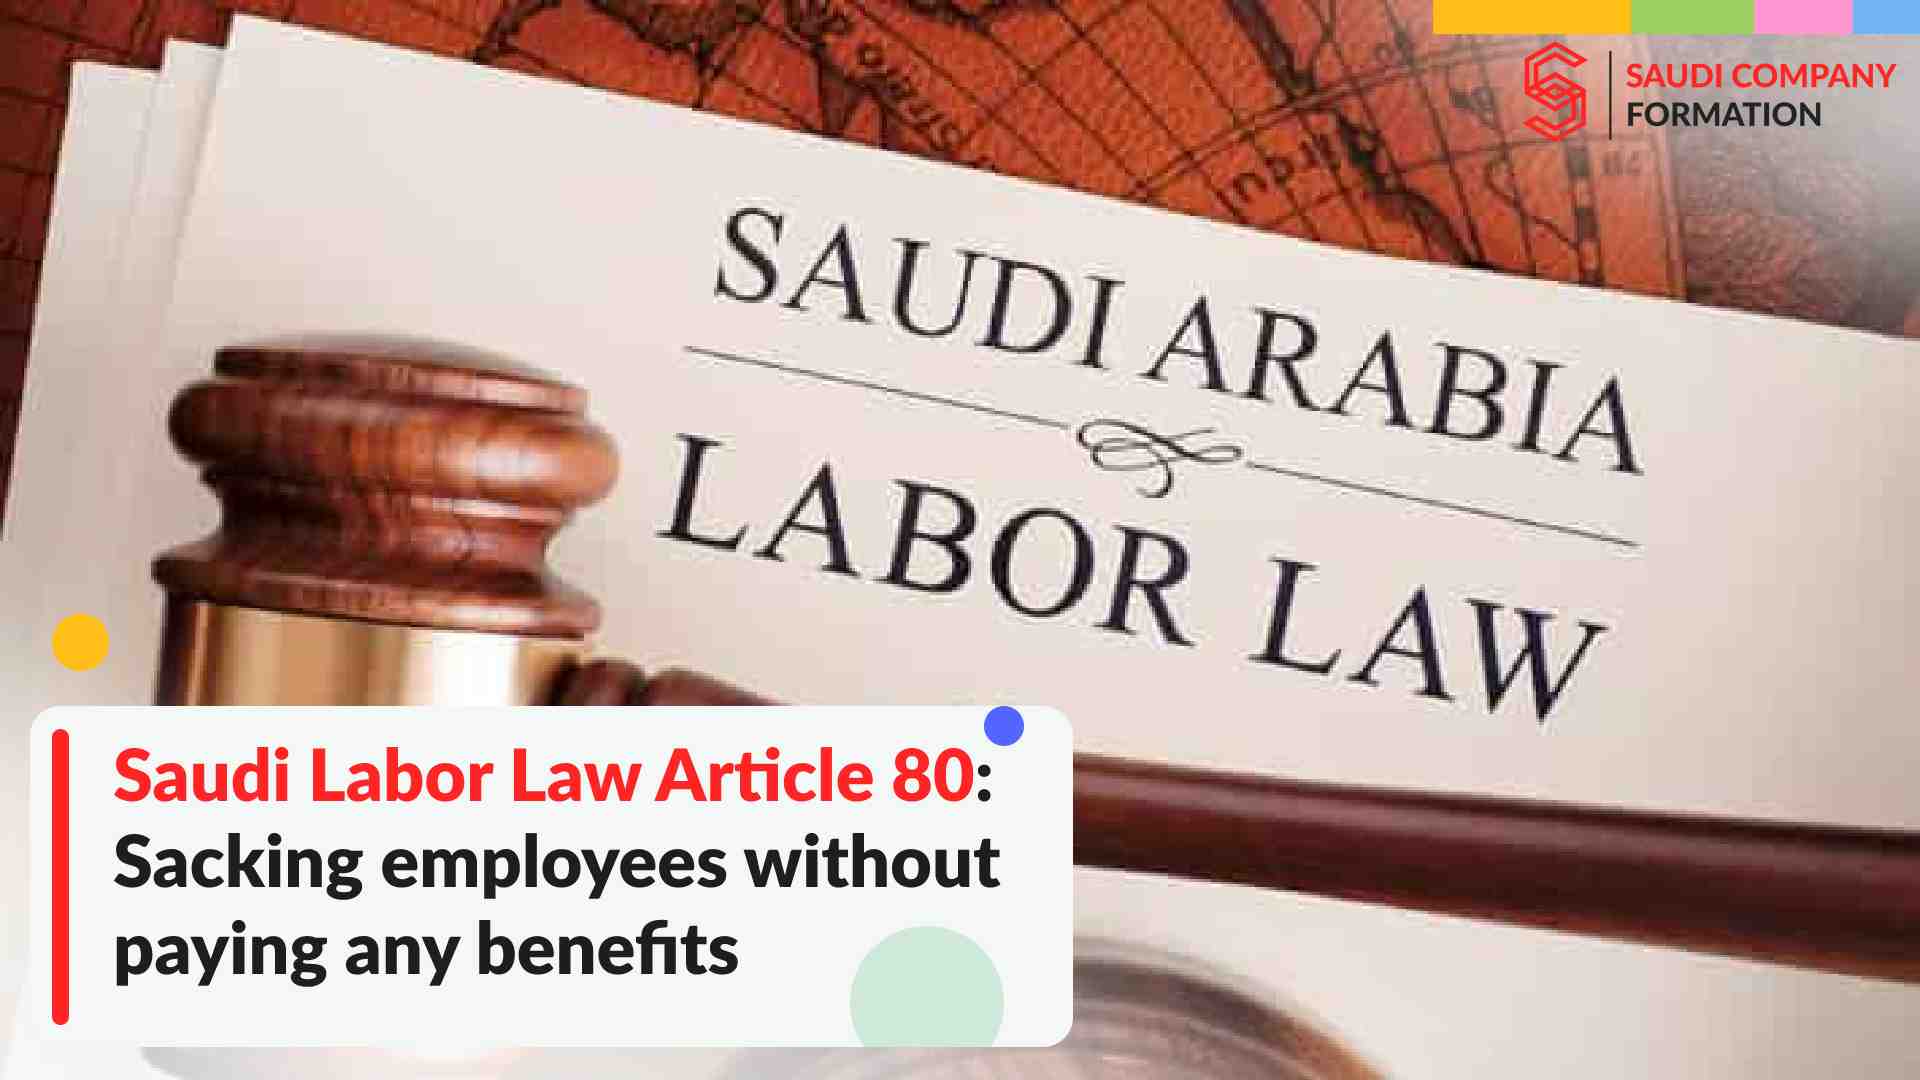 Saudi Labor Law Article 80: Sacking employees without paying any benefits